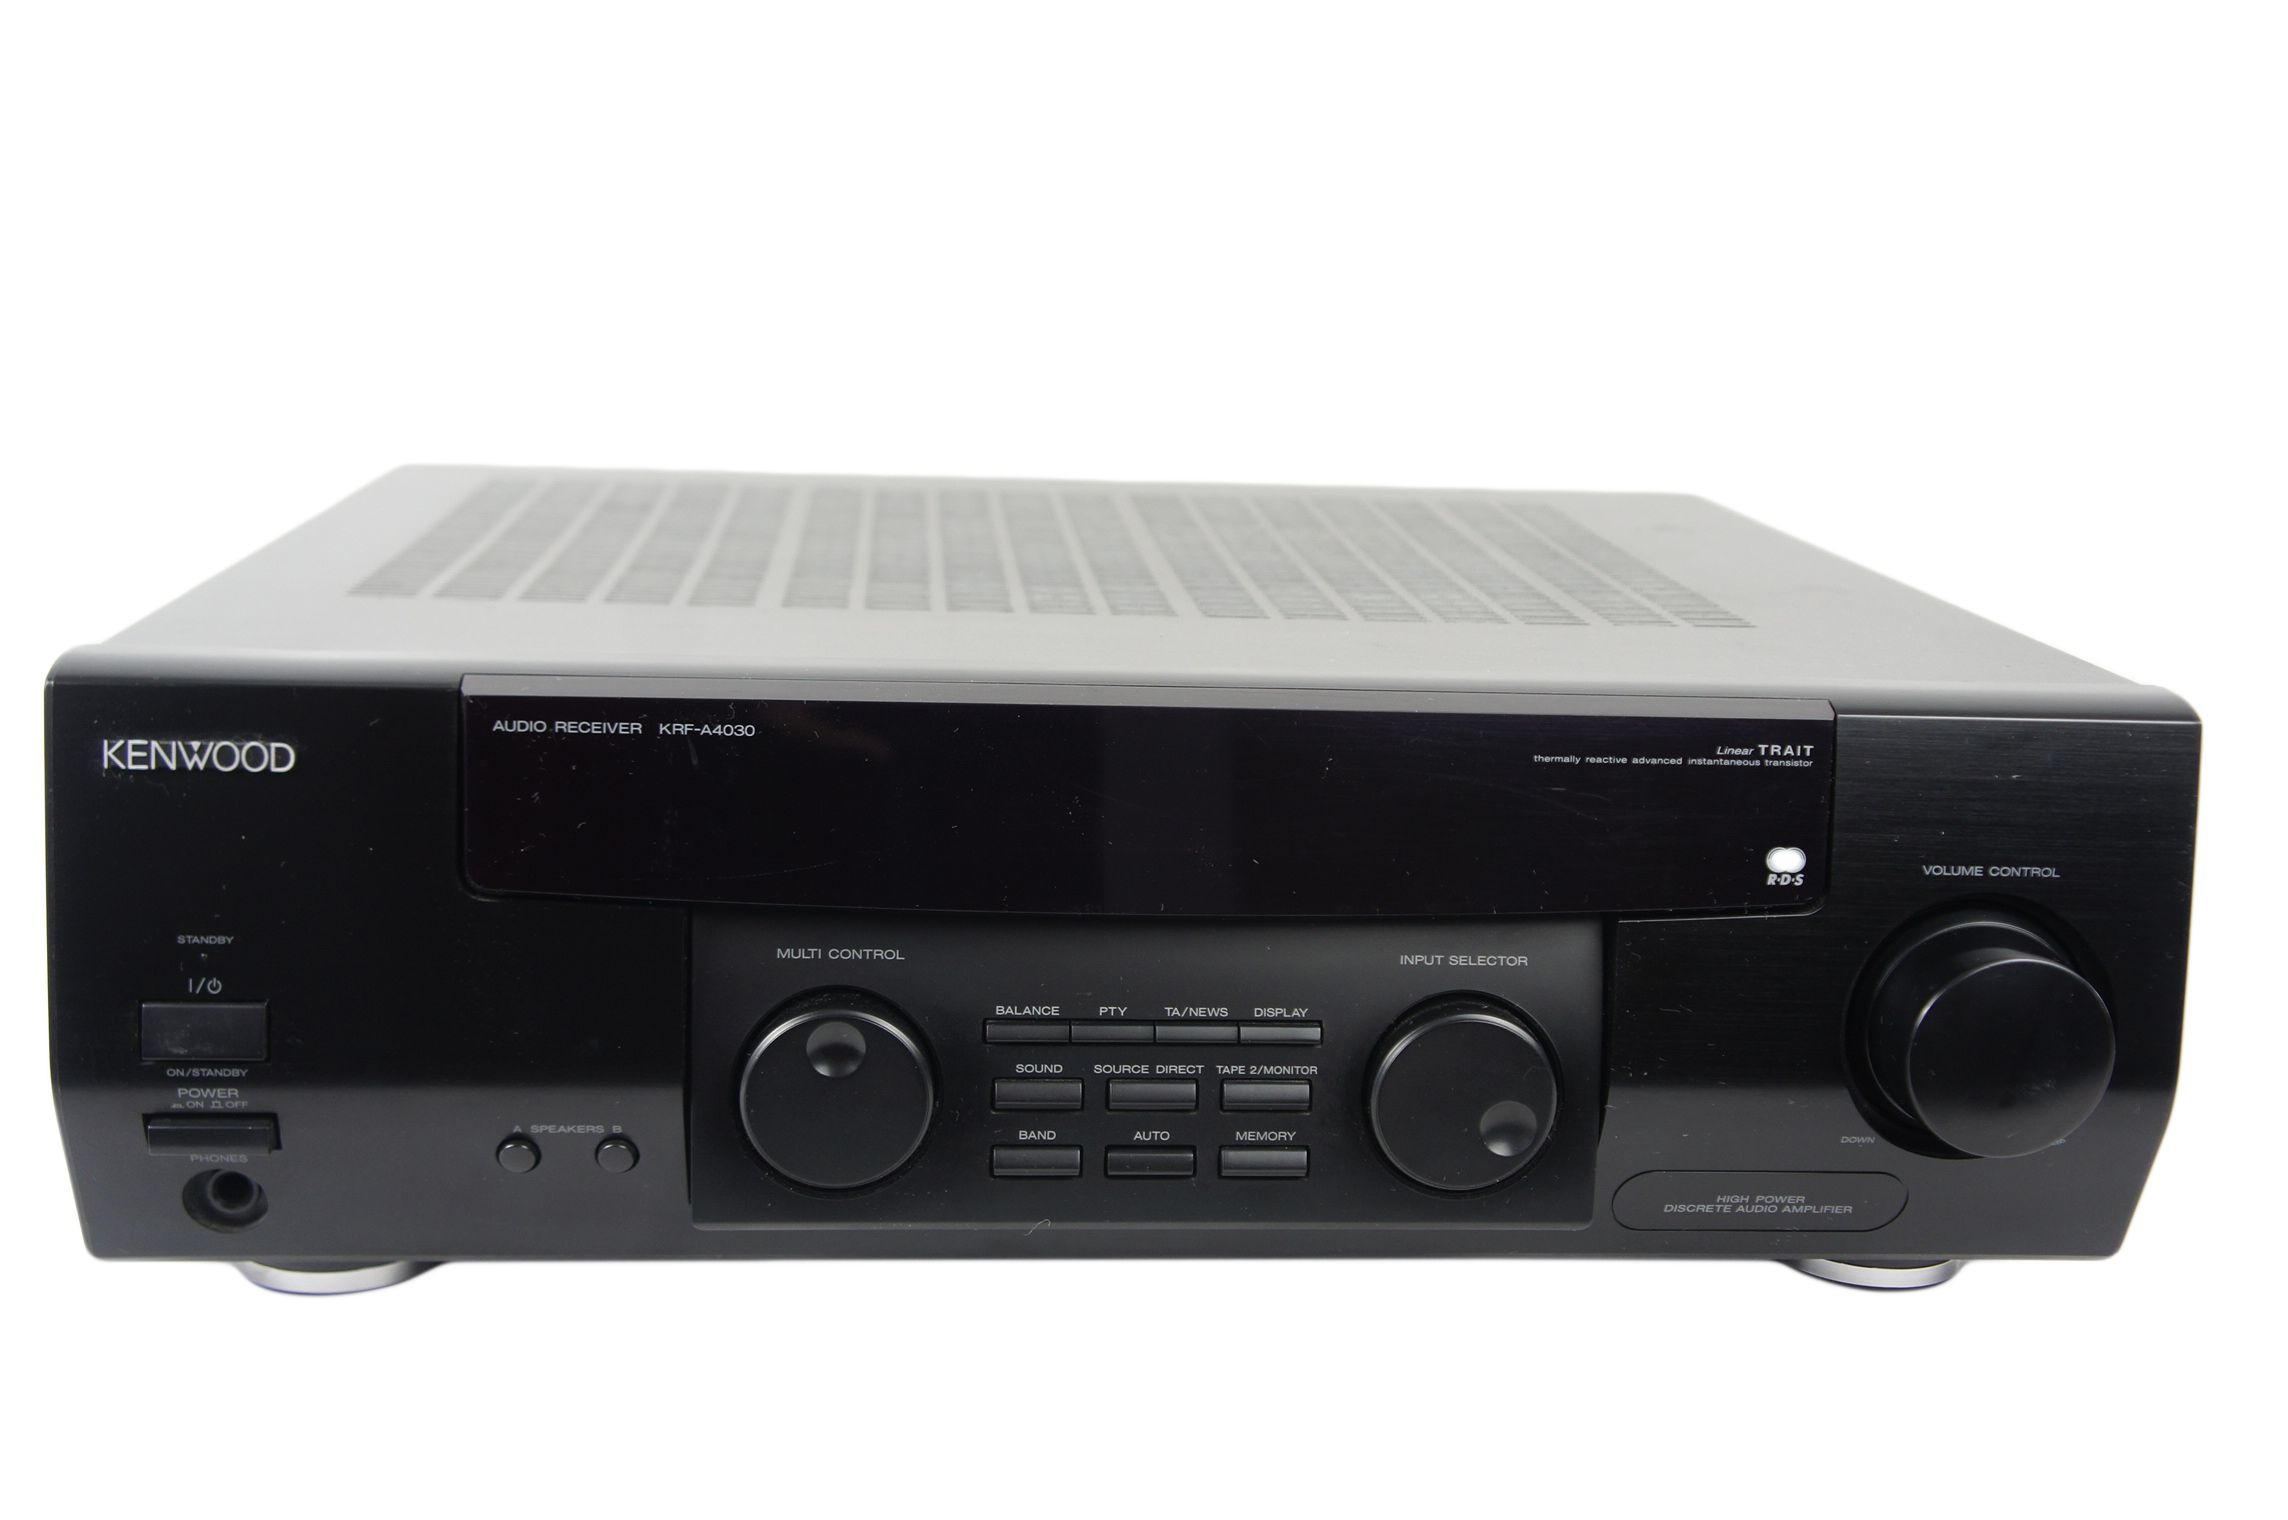 Kenwood_KRF-A_4030_Stereo_RDS_Receiver_03